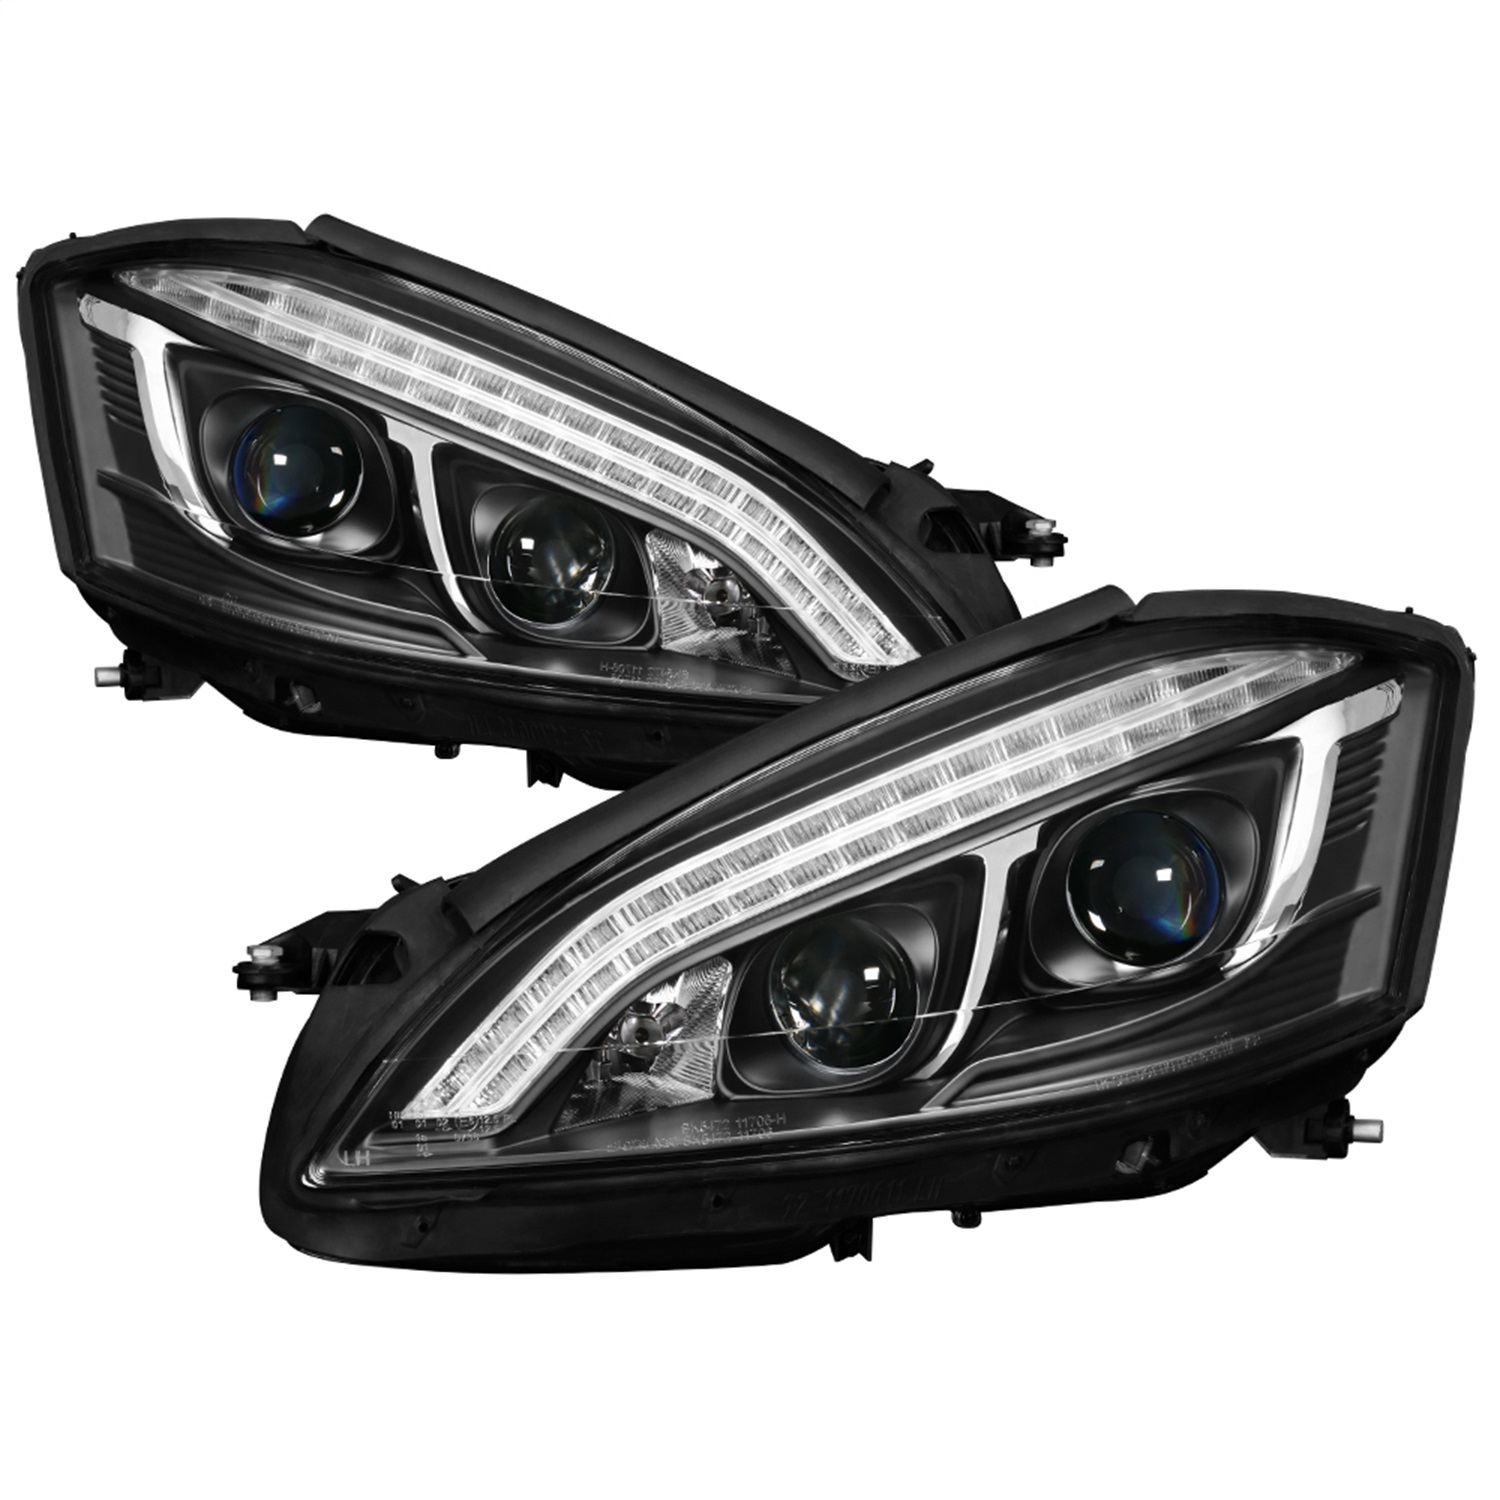 Spyder Auto 5083890 DRL LED Projector Headlights Fits 07-09 S450 S550 S600